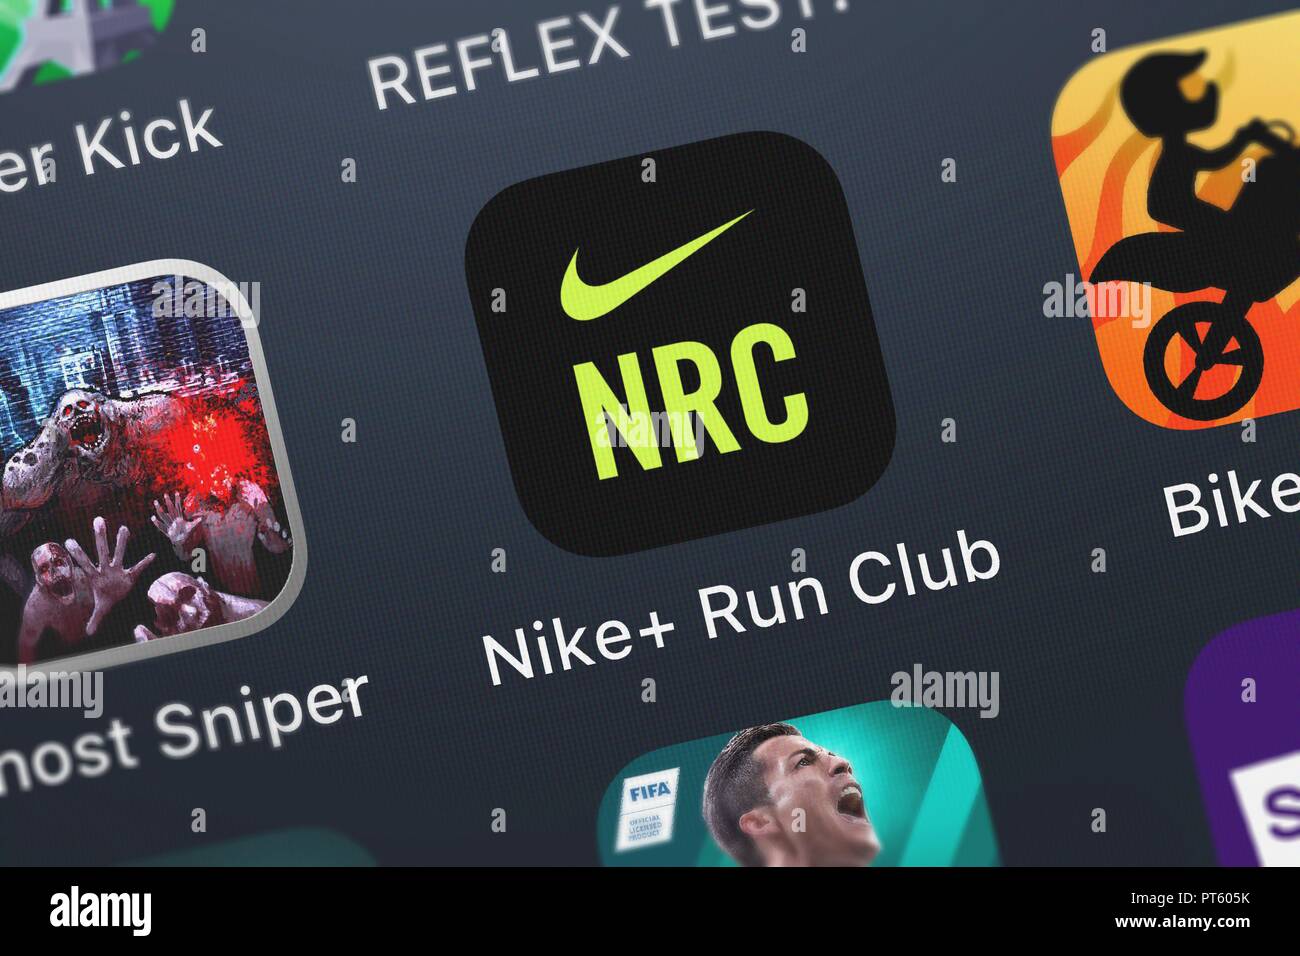 London, United Kingdom - 06, 2018: Icon of the mobile app Nike+ Run Club from Nike, Inc on an Stock Photo - Alamy